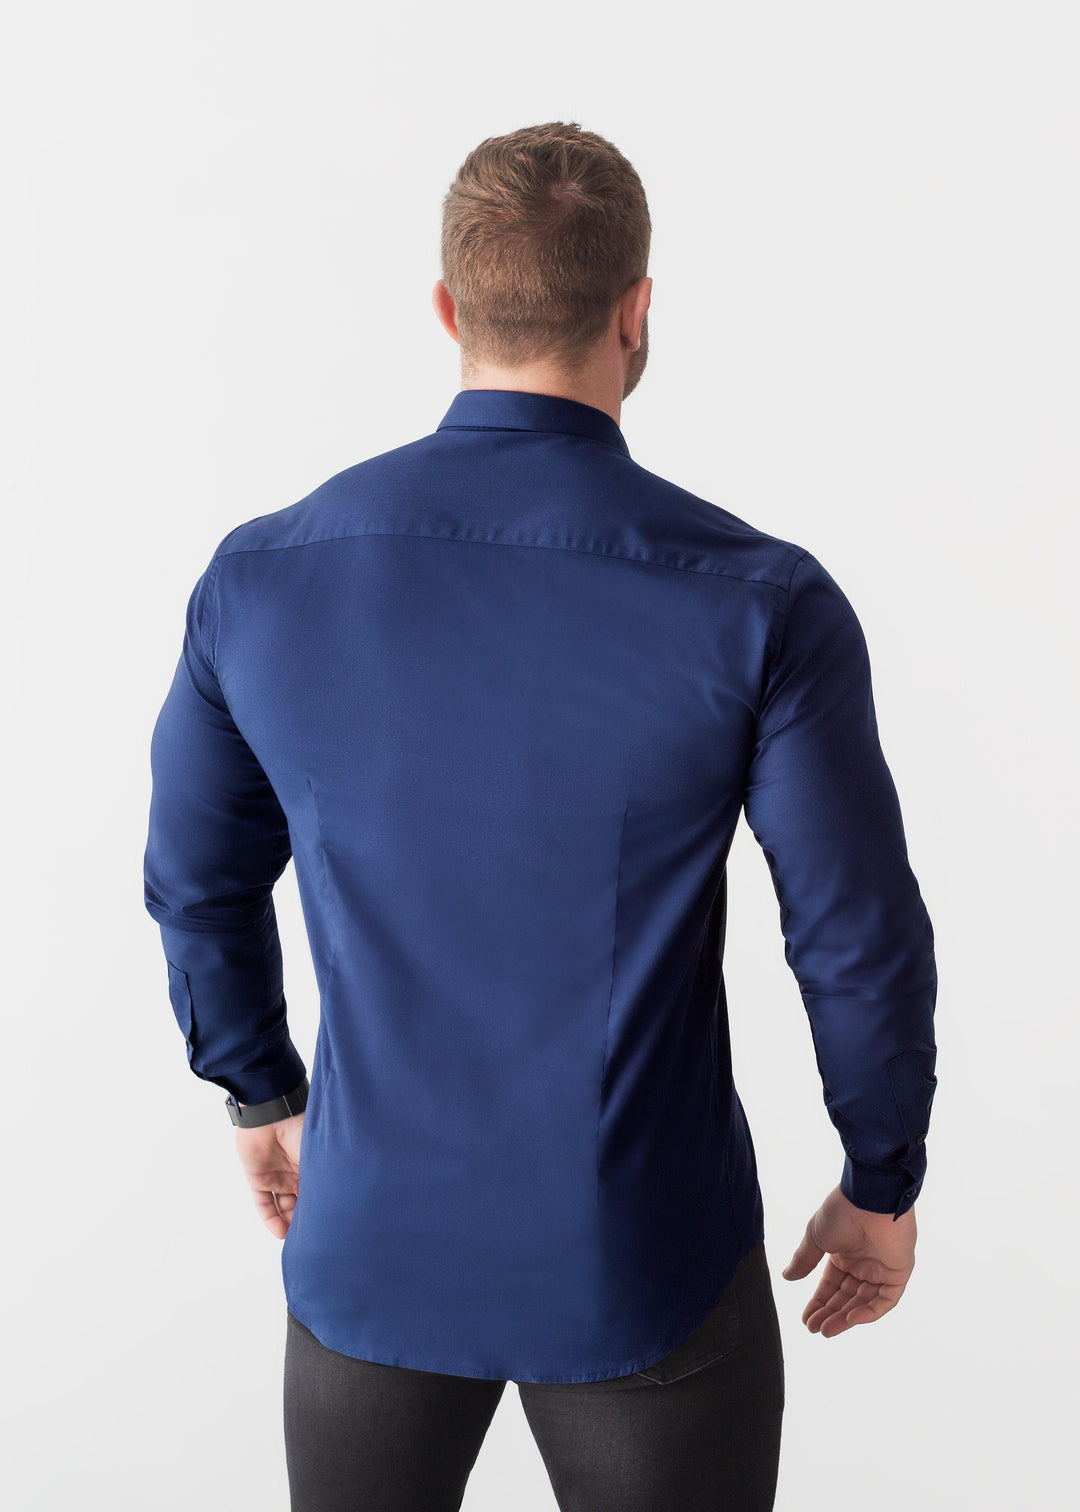 Navy Blue Tapered Fit Shirt. A Proportionally Fitted and Comfortable Navy Muscle Fit Shirt. Ideal for bodybuilders